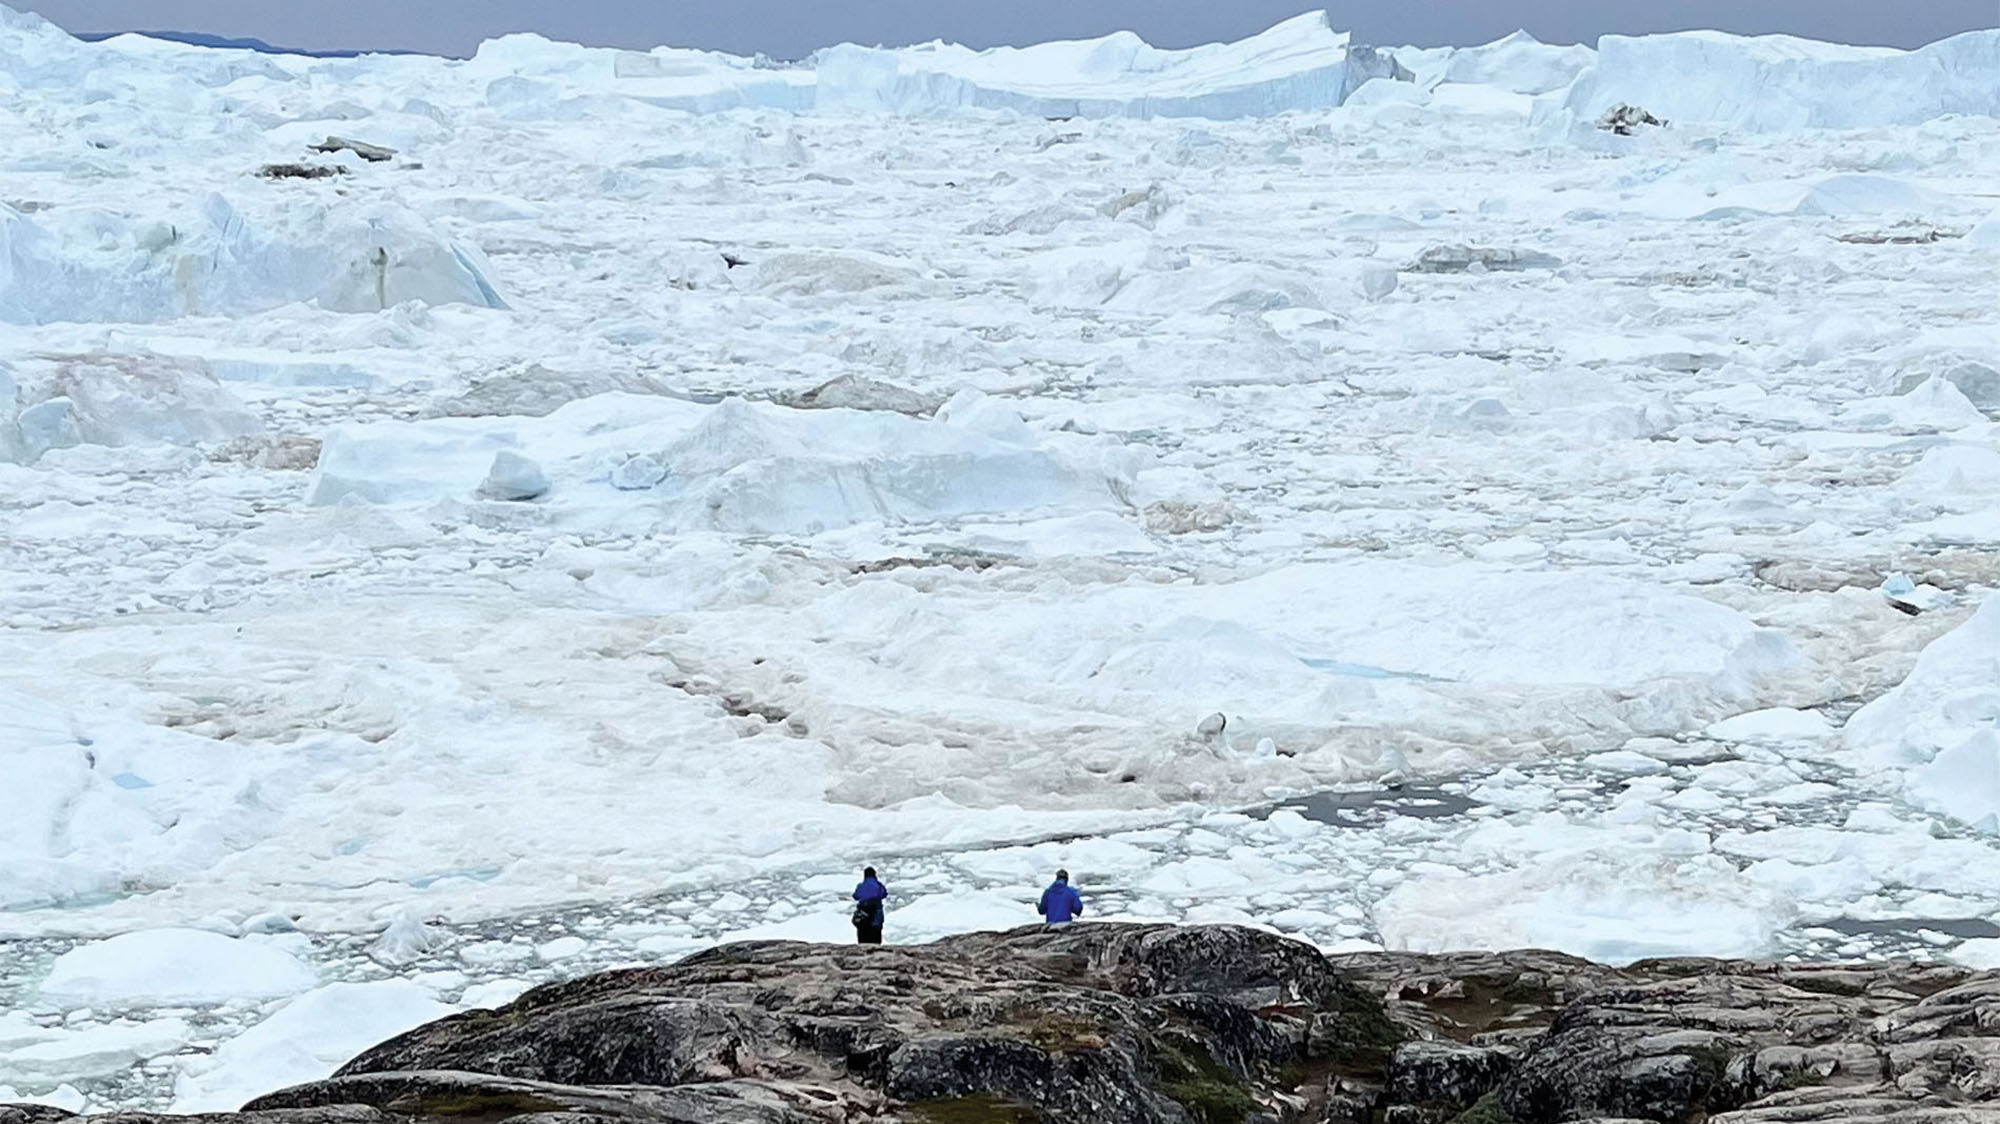 Adventure Canada guests contemplate the Ilulissat Icefjord.